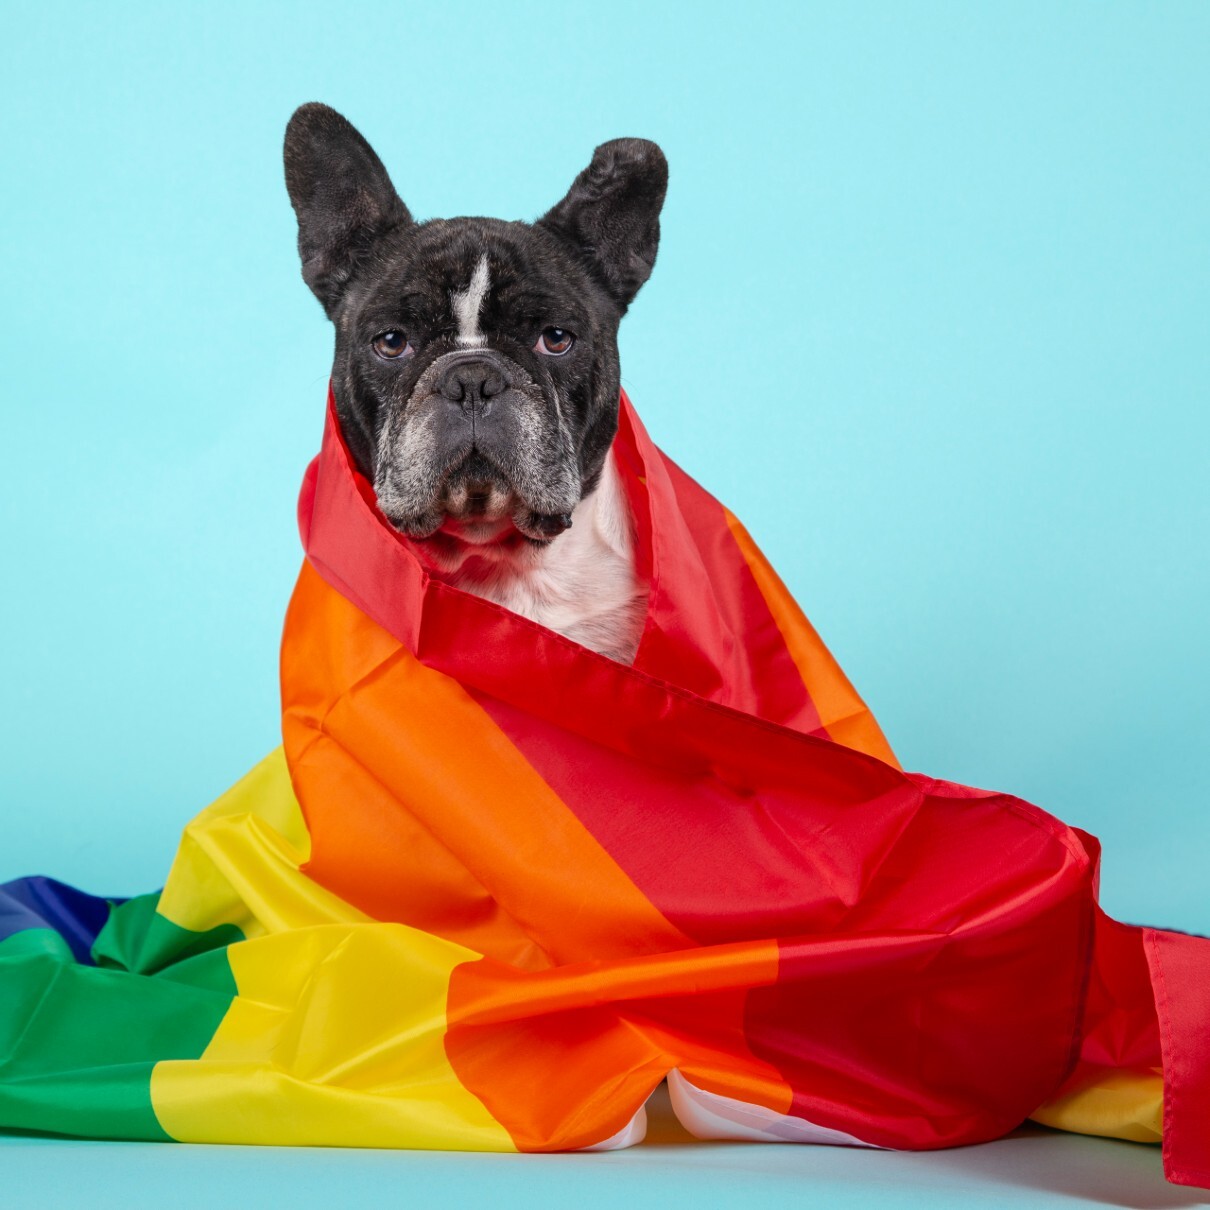 An dog with a pride flag wrapped around him against a light blue background - learn about support dogs with Dog Training Elite.